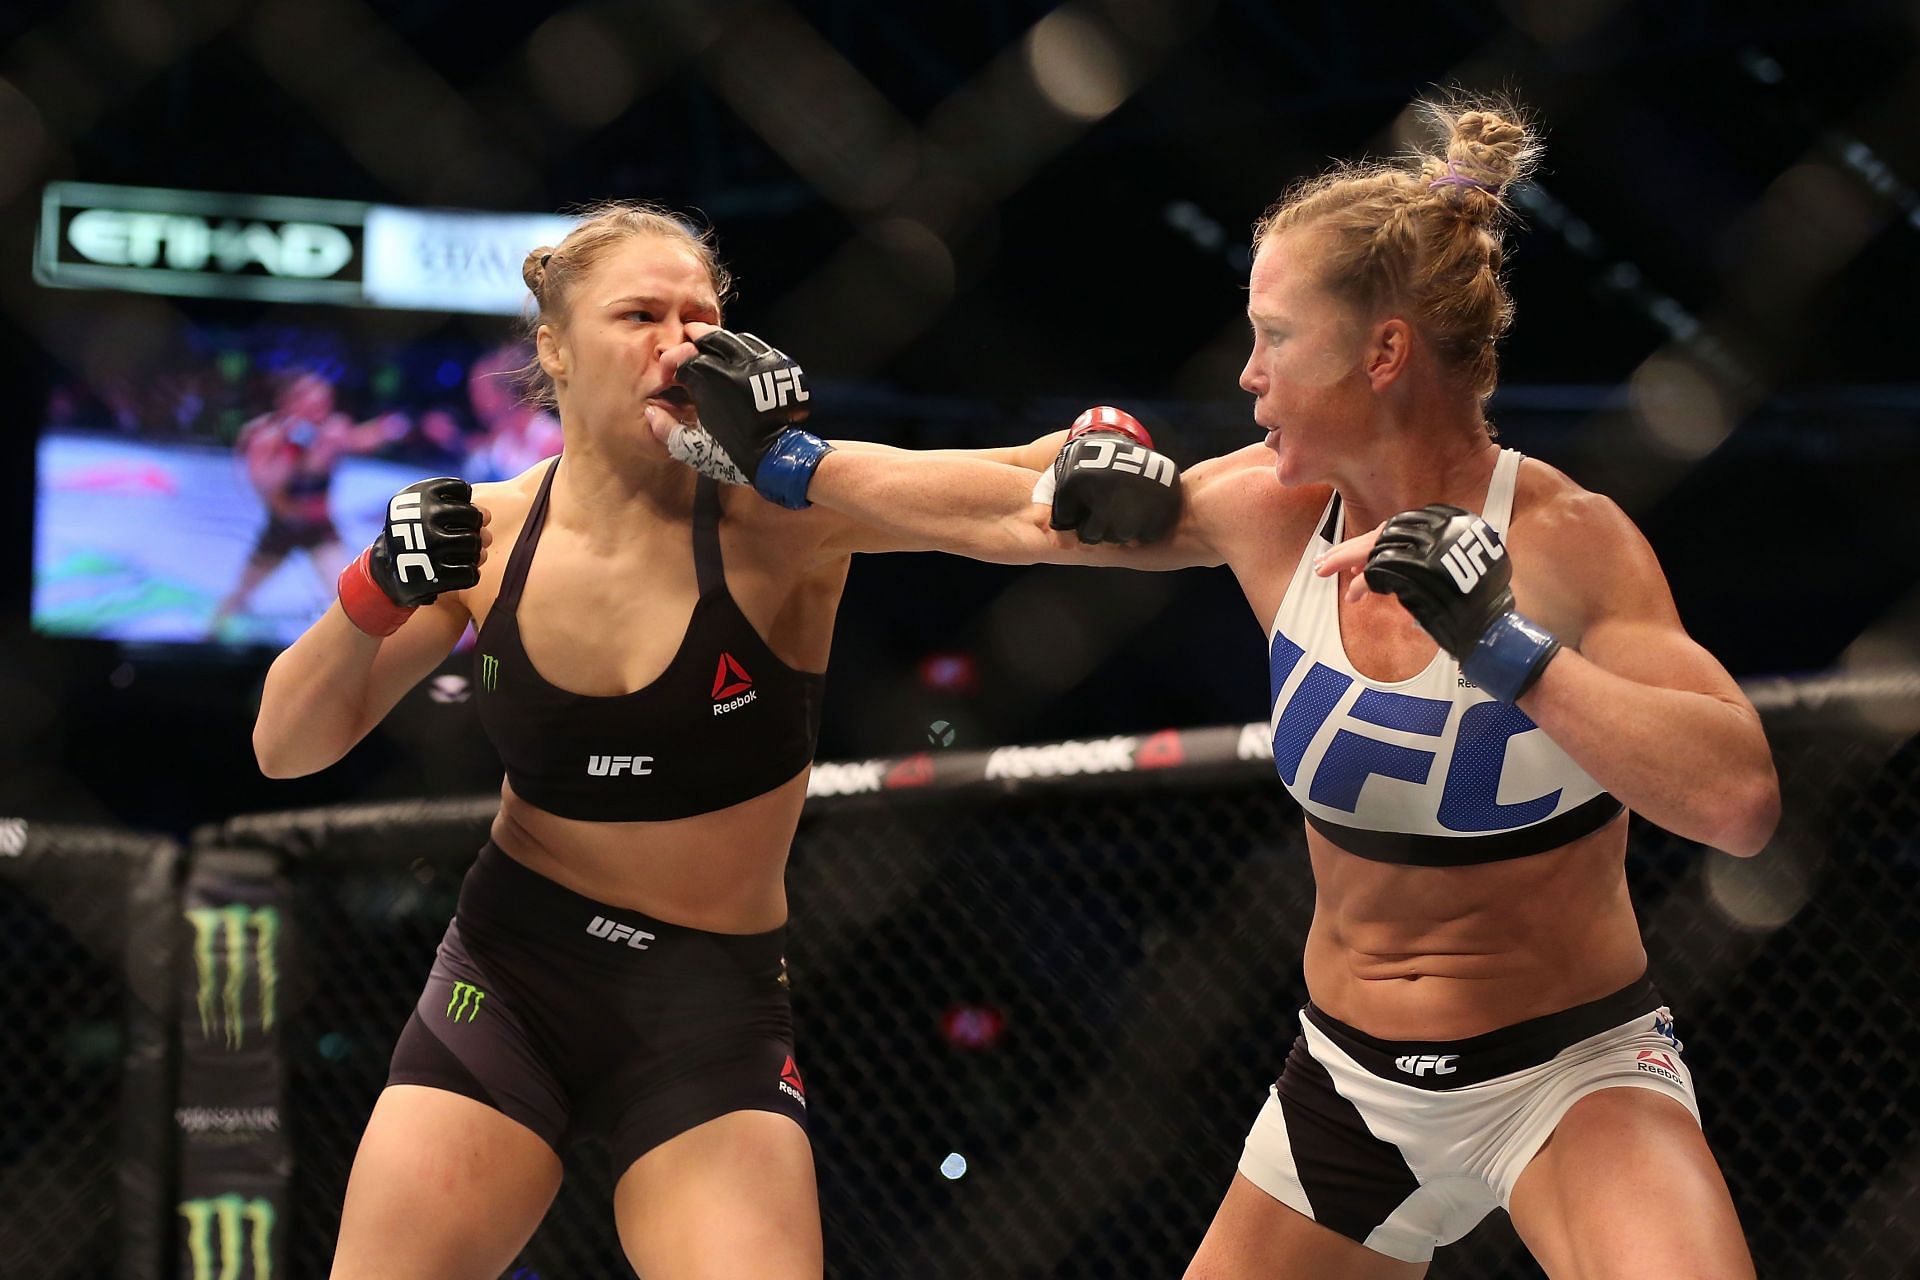 Holm pulled off one of the biggest upsets in recent UFC history against Rousey.